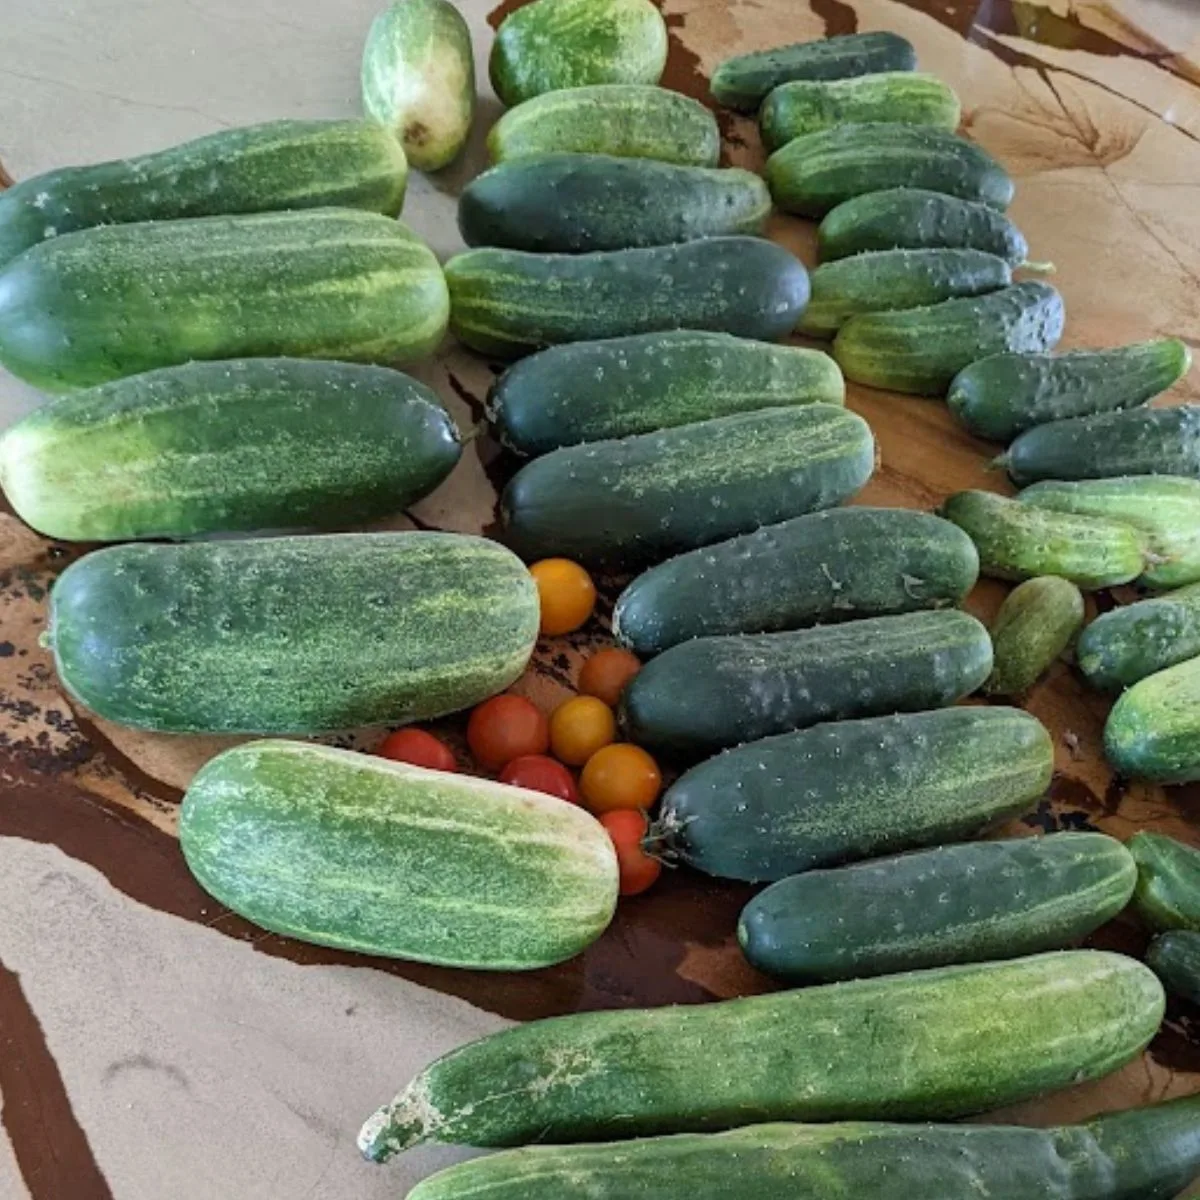 a pile of cucumbers on my countertop.